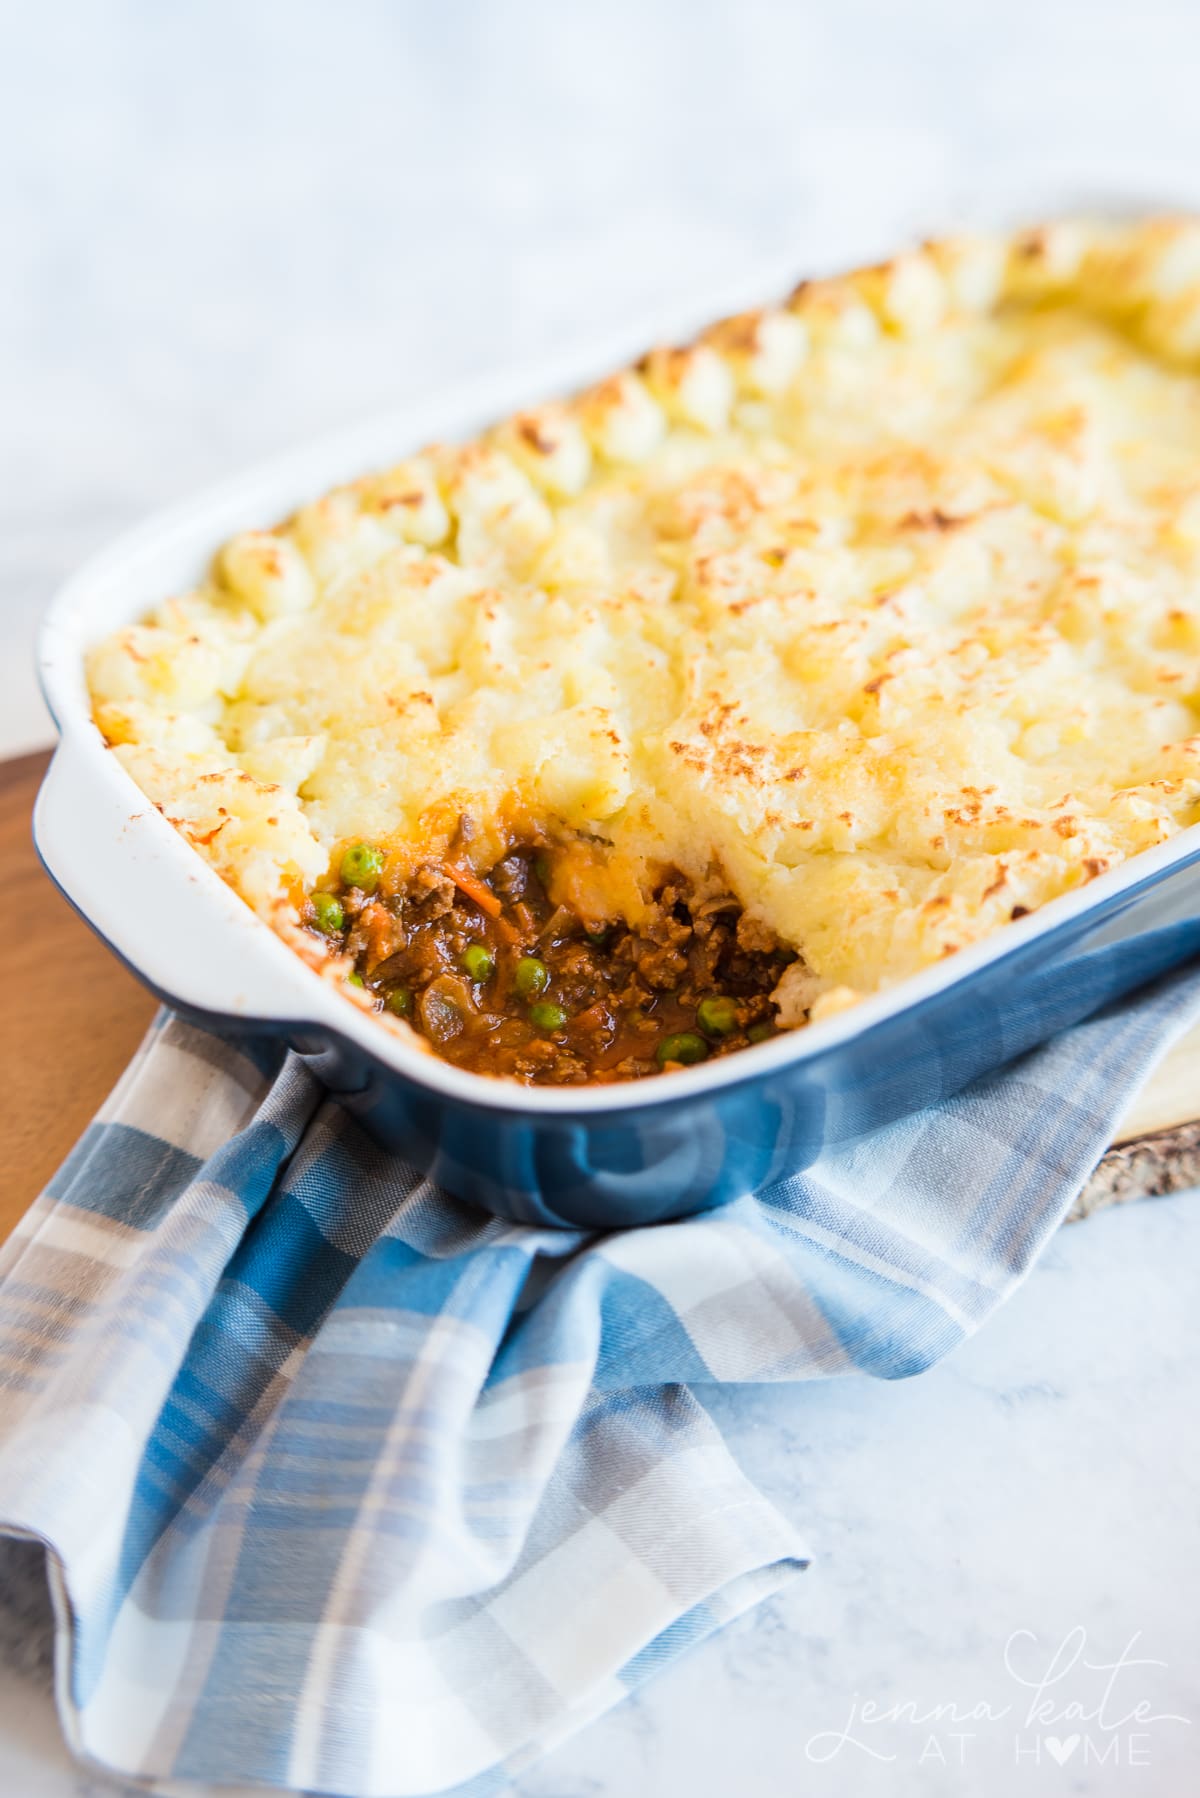 Shepherds' pie filling with beef, carrots and peas